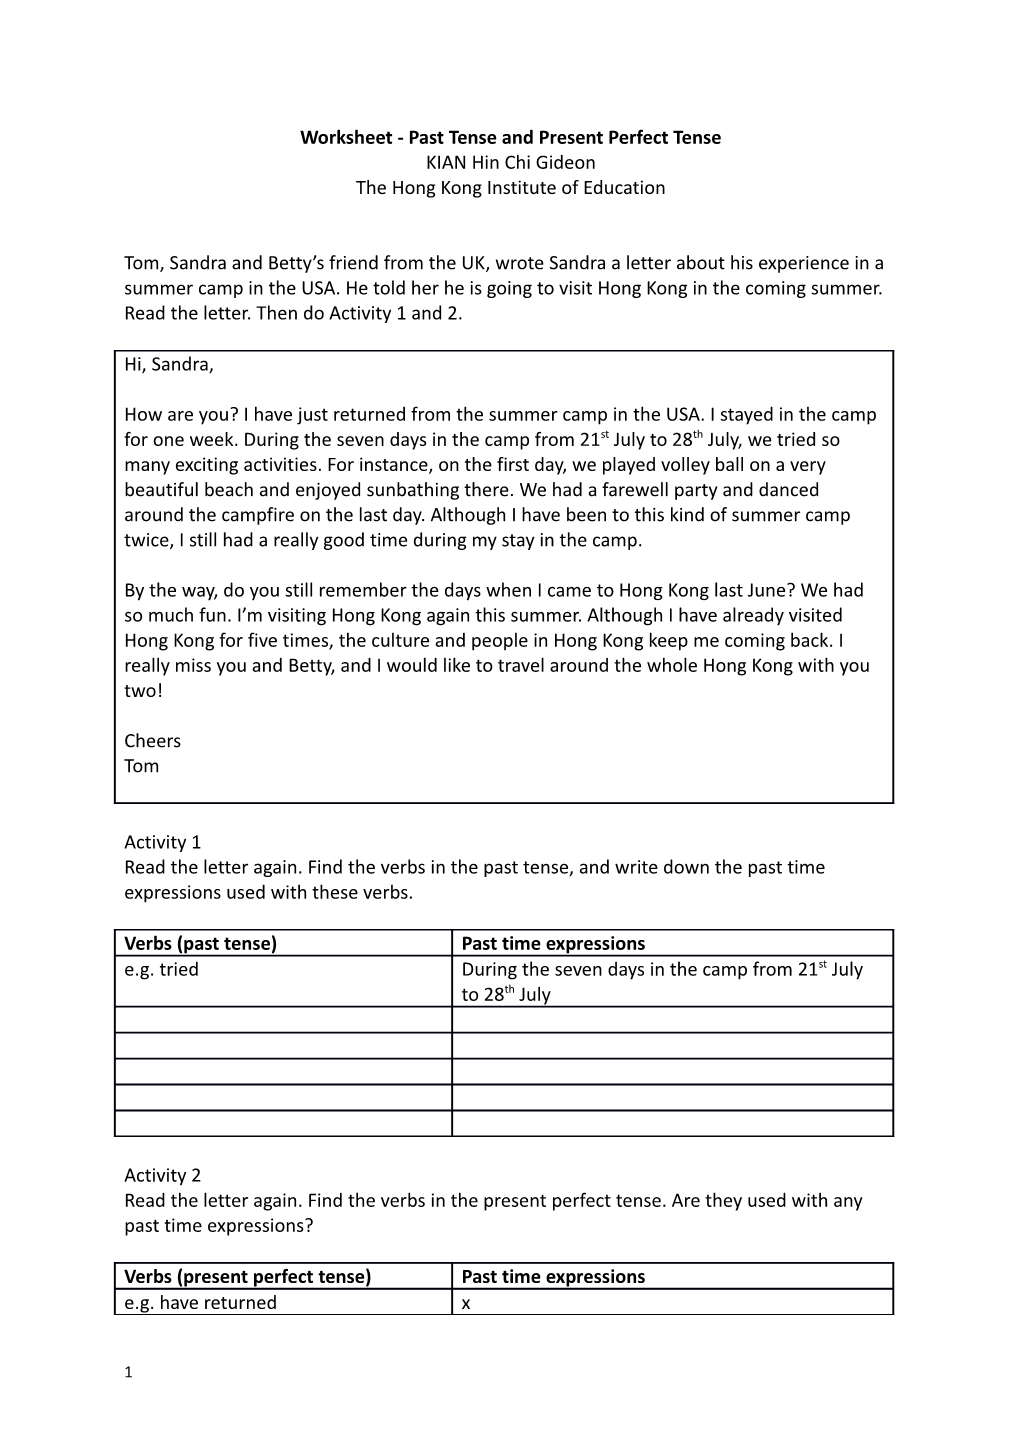 Worksheet - Past Tense and Present Perfect Tense